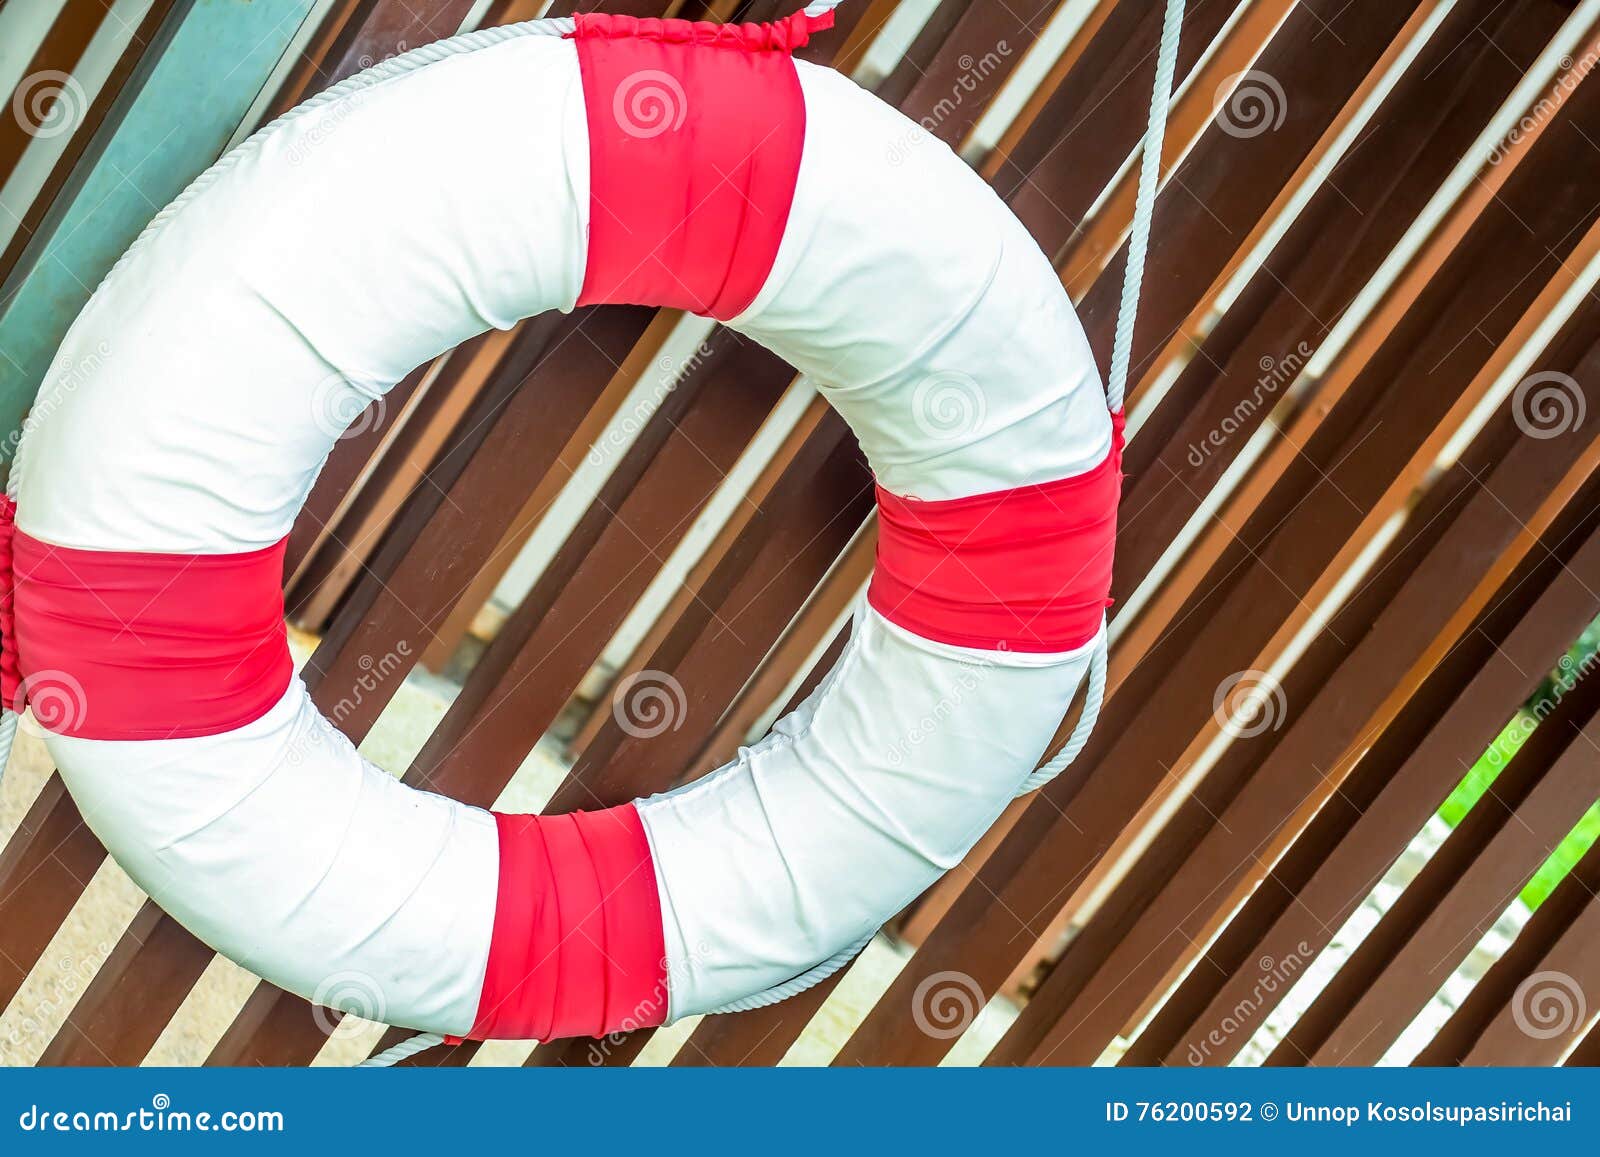 Red safe guard ring, Stock image